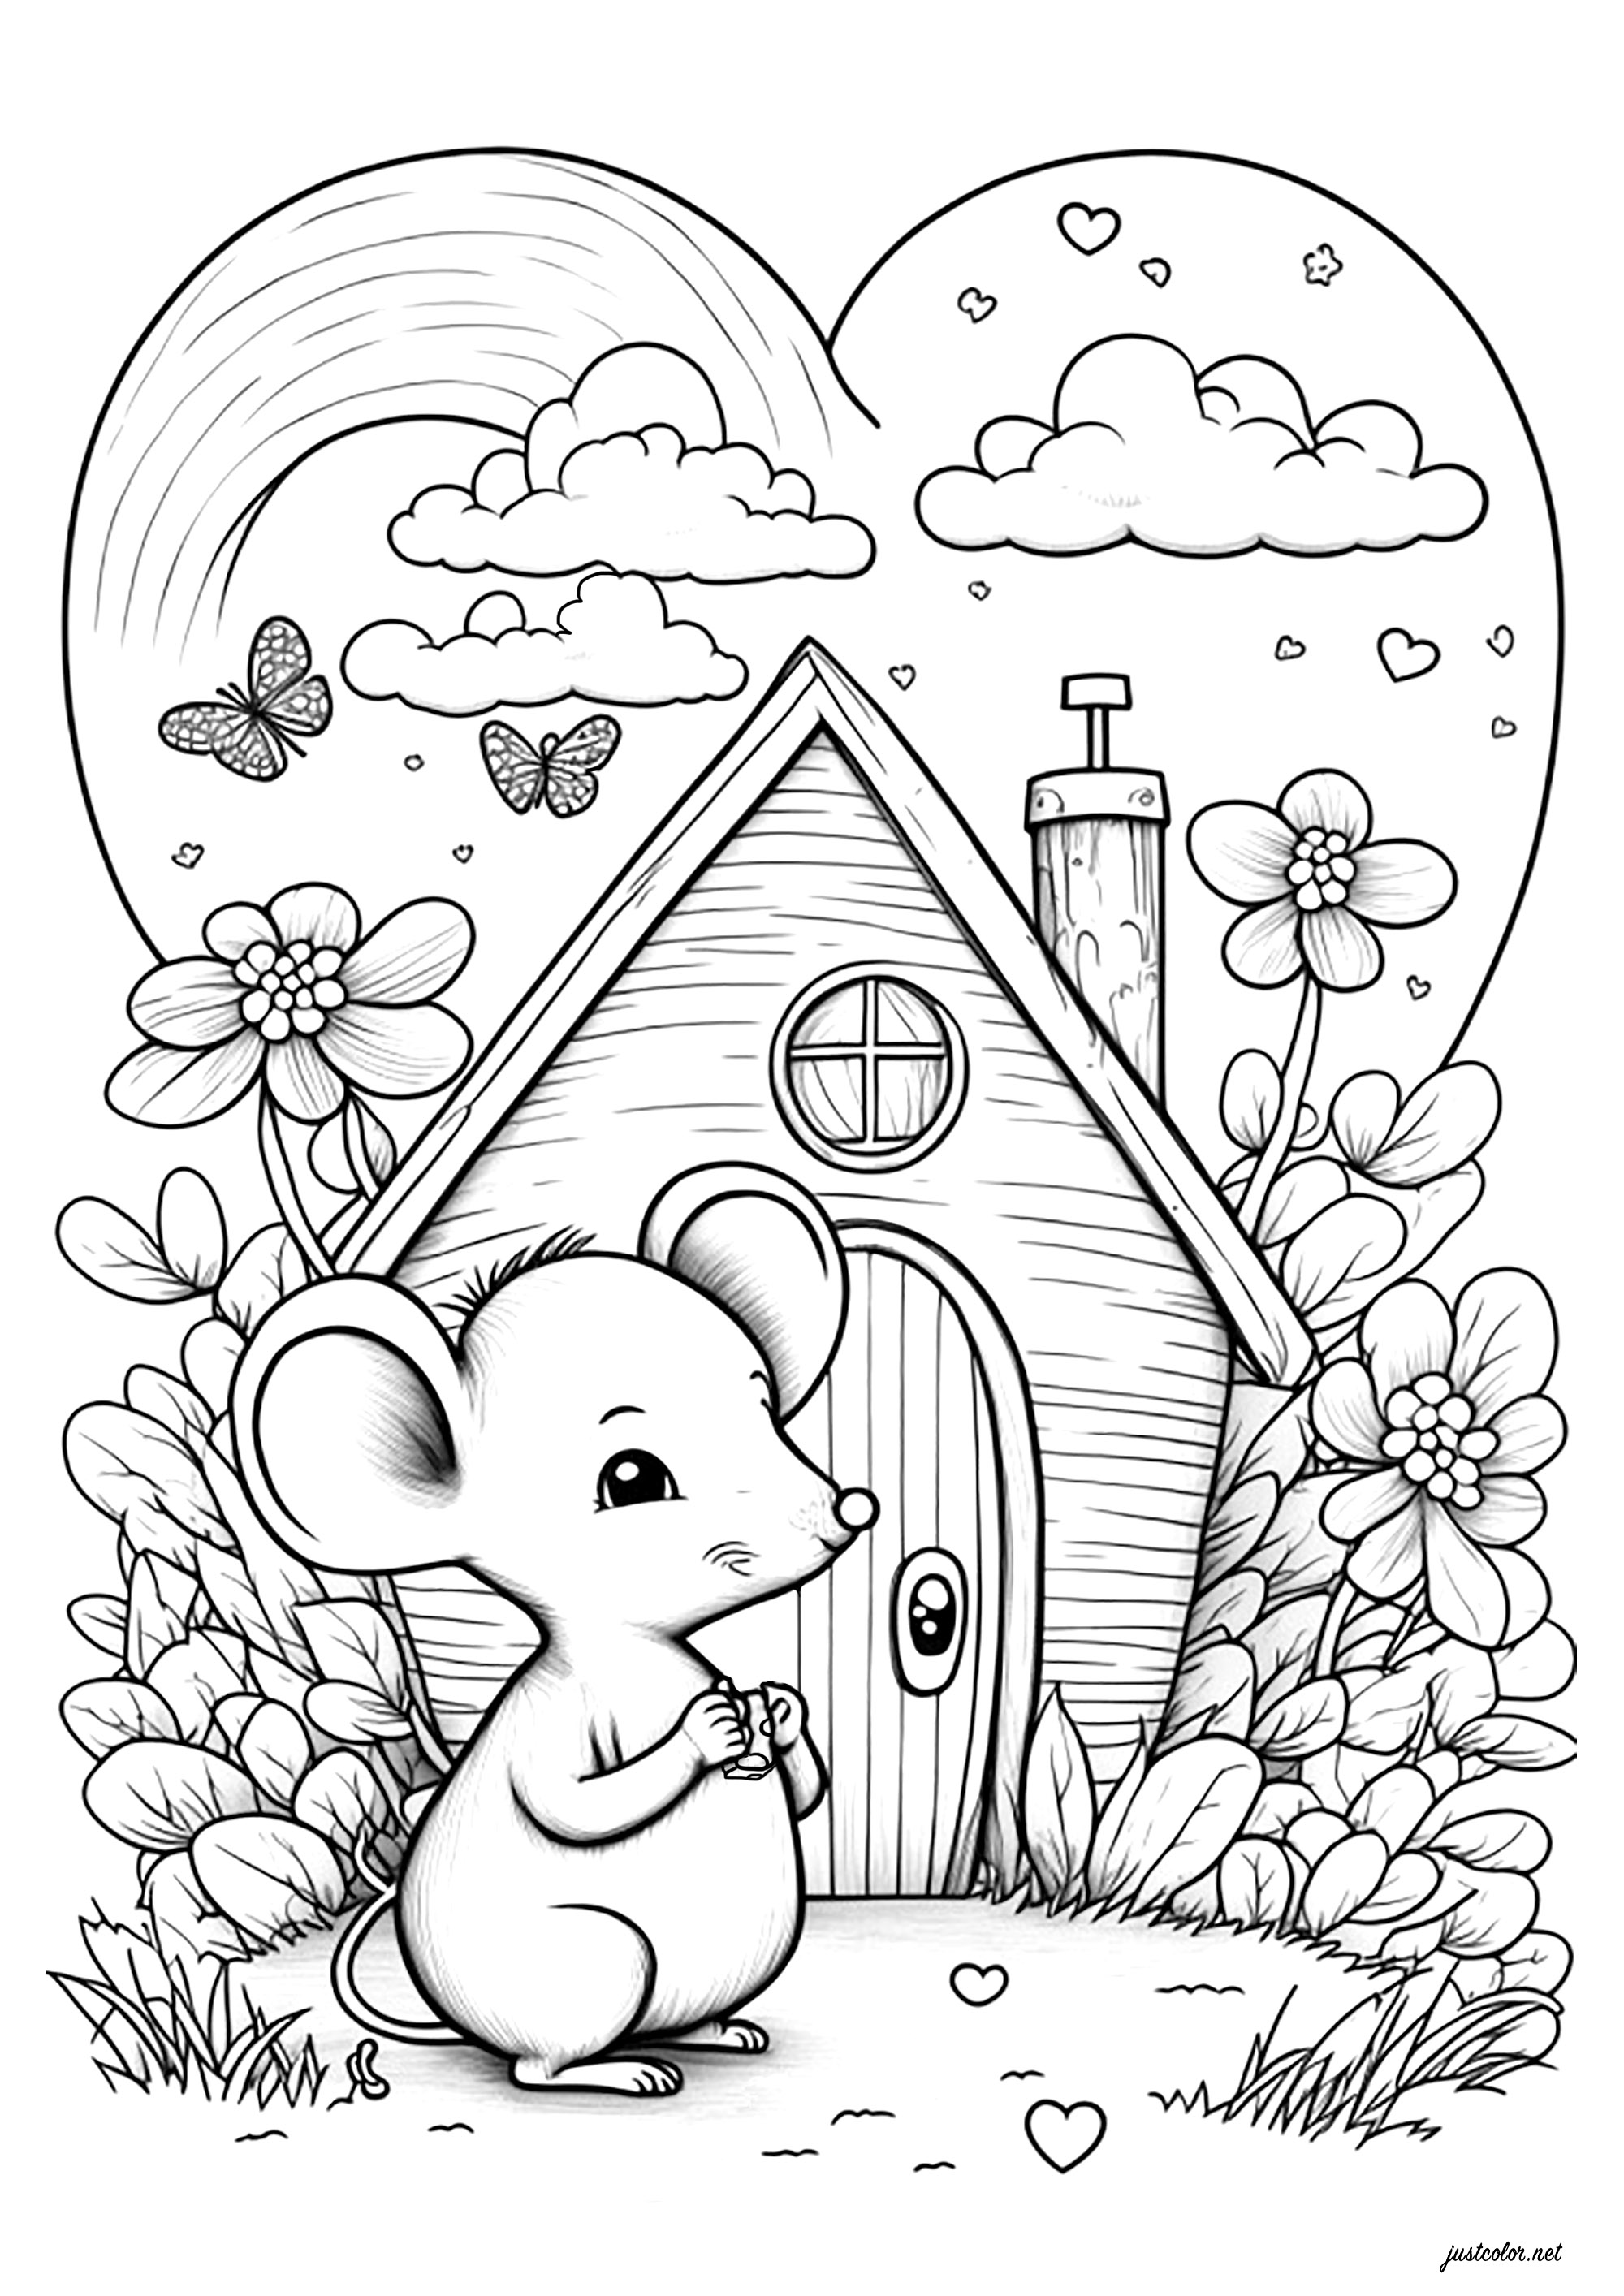 Mouse eating a piece of cheese in front of his nice house. This cute mouse seems to be enjoying this moment of peace and quiet in front of his little house. Color every detail of the house, the flowery garden, the sky full of hearts and butterflies, and the cute mouse... your creativity has no limits!